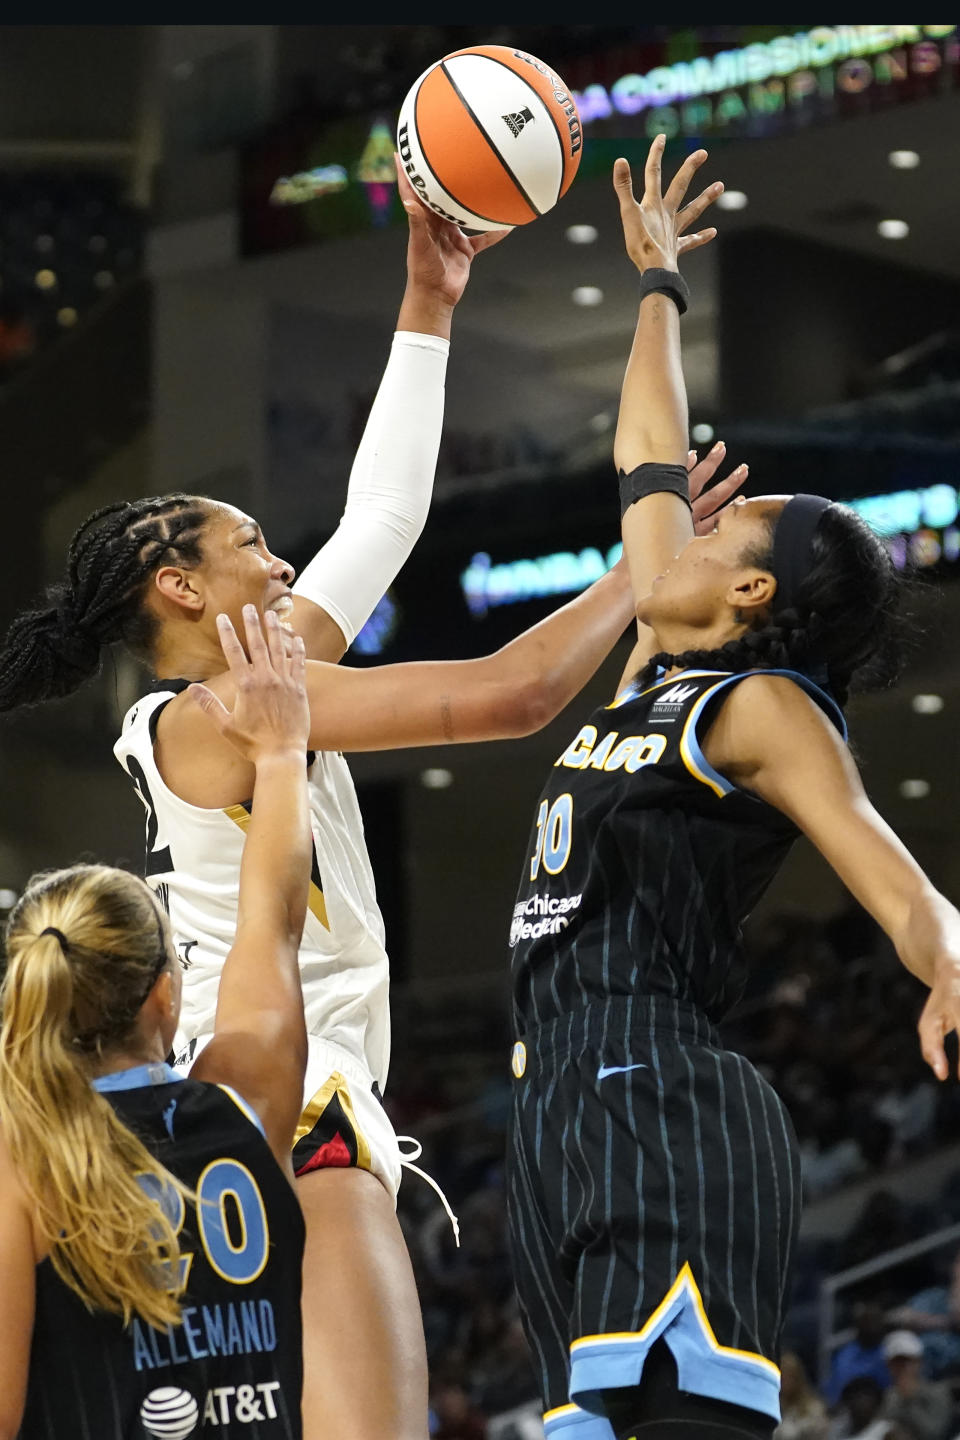 Las Vegas Aces' A'ja Wilson, left, shoots over Chicago Sky's Azura Stevens during the first half of the WNBA Commissioner's Cup basketball game Tuesday, July 26, 2022, in Chicago. (AP Photo/Charles Rex Arbogast)